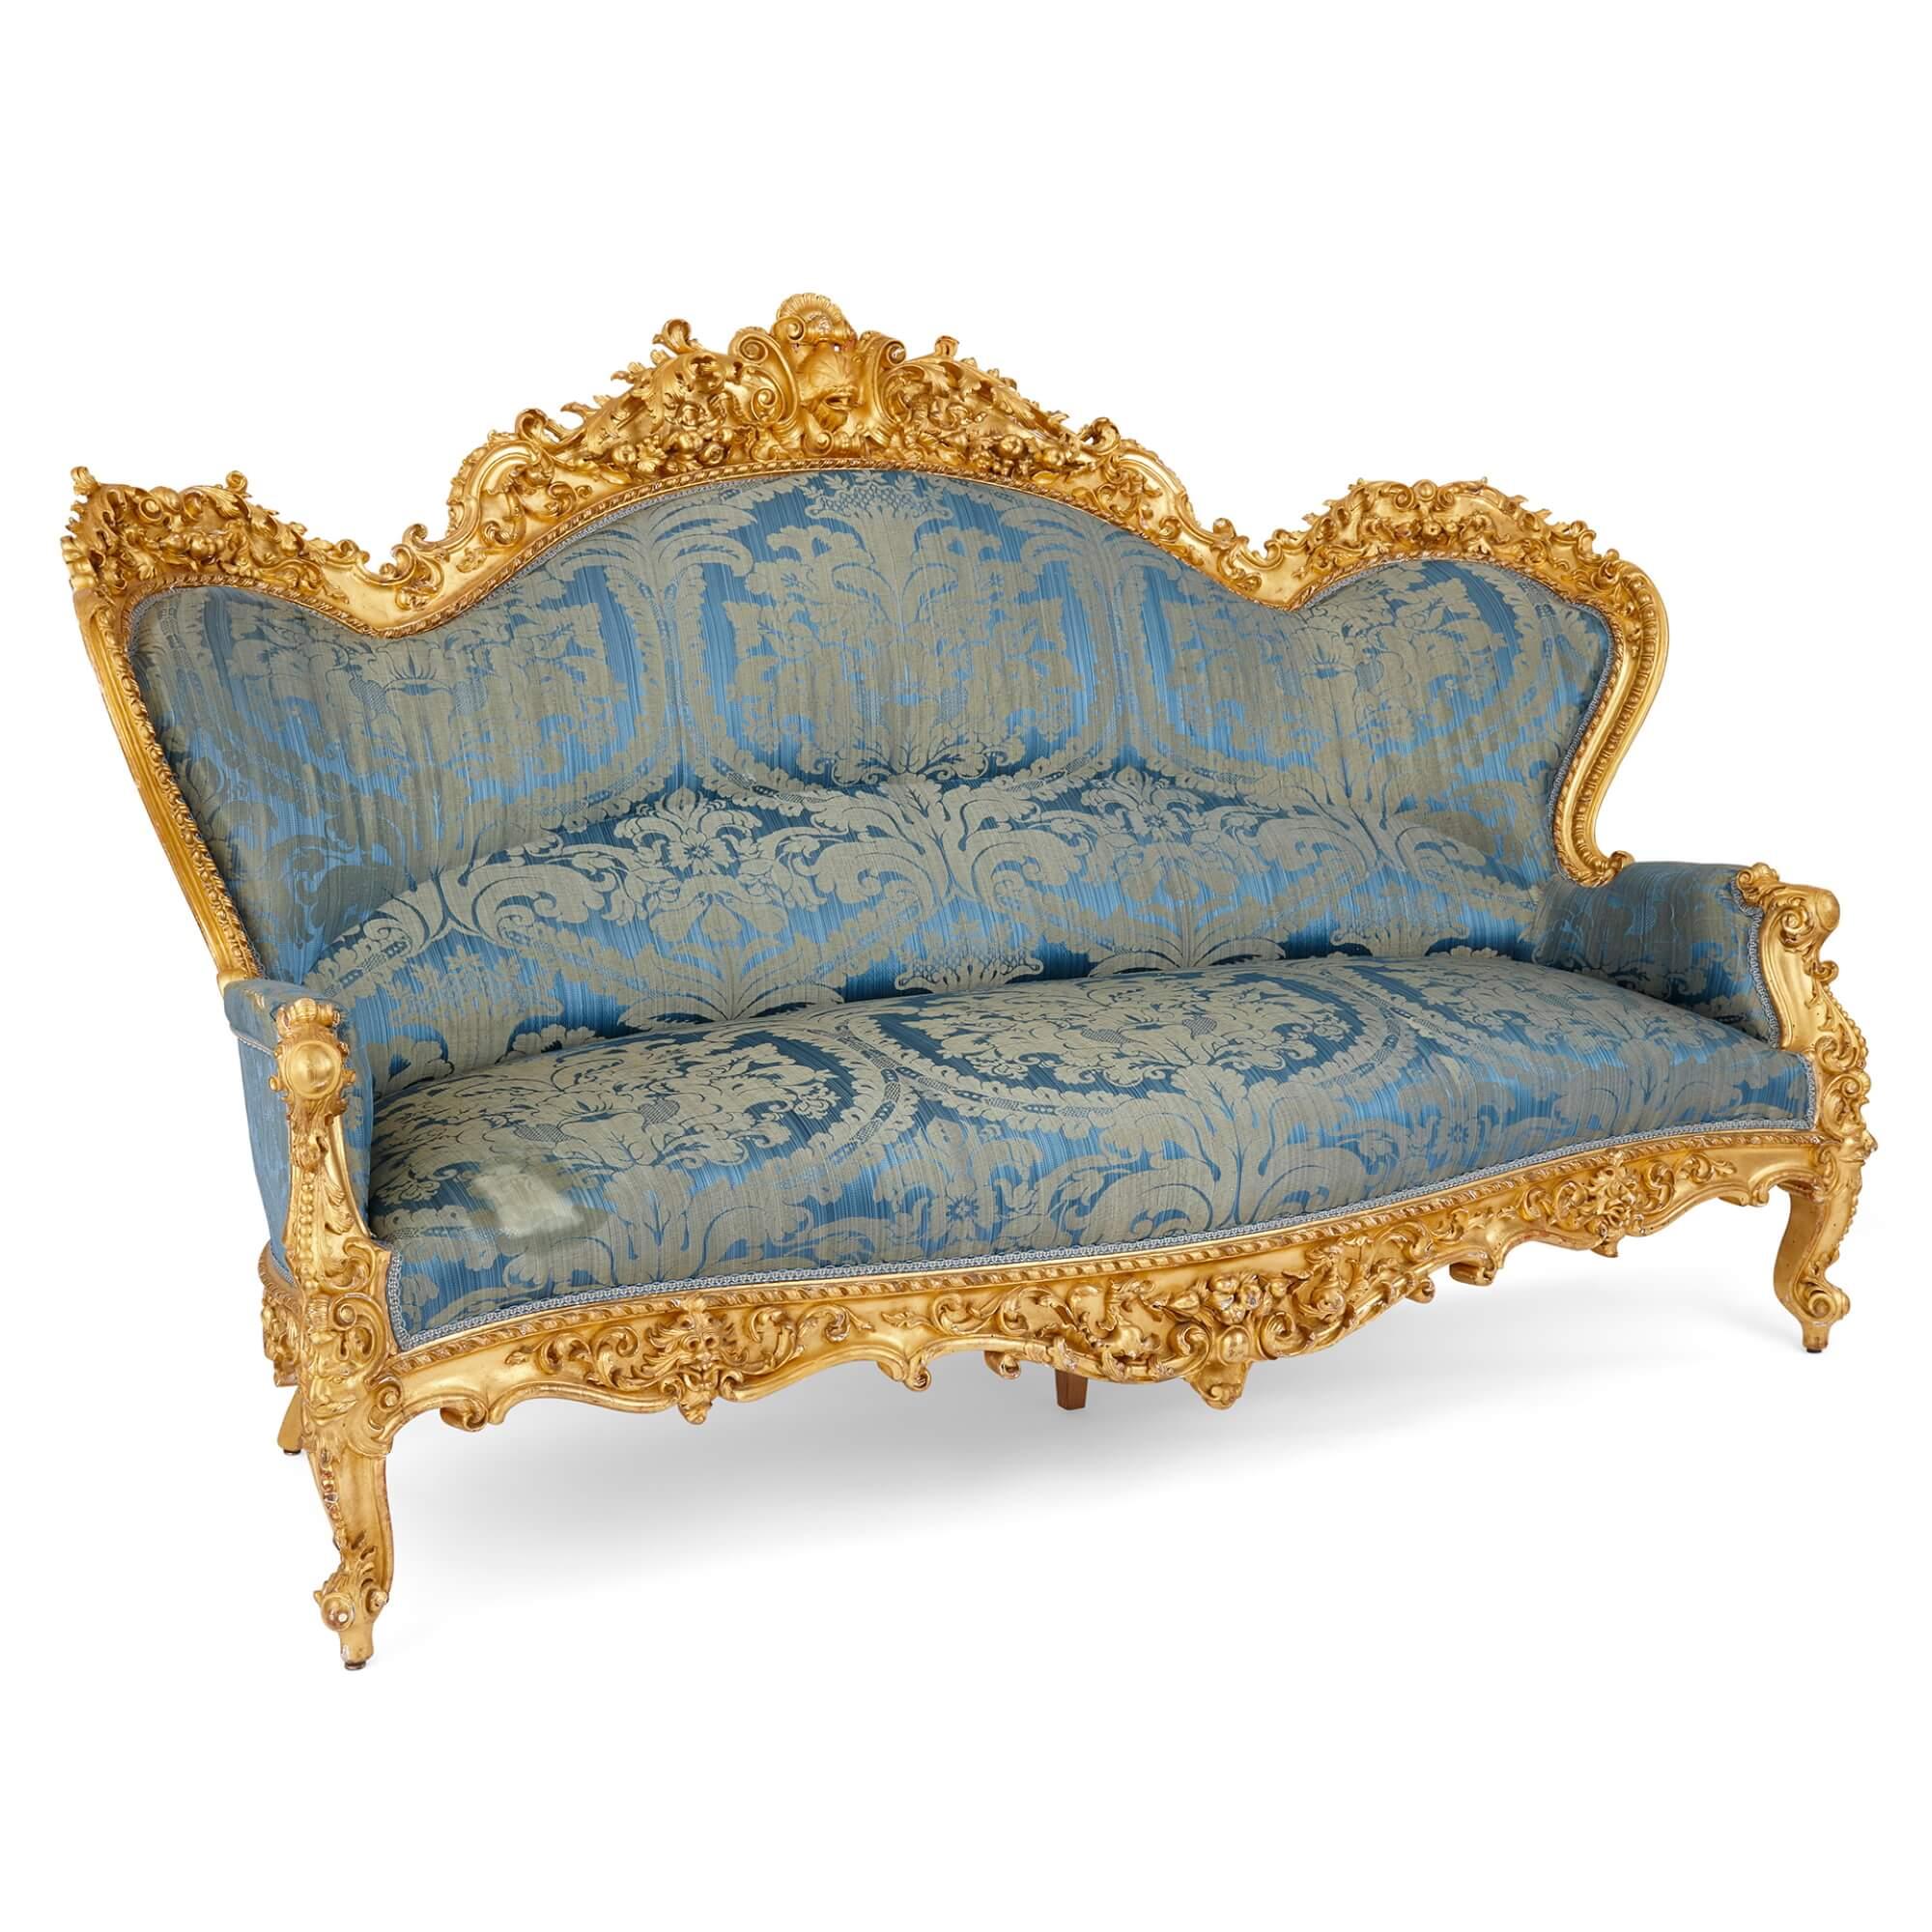 A large Rococo revival carved giltwood sofa
French, Late 19th Century
Height 135cm, width 196cm, depth 90cm

This excellent antique piece is a large, French, late nineteenth century Rococo revival carved giltwood sofa. The sofa's frames are